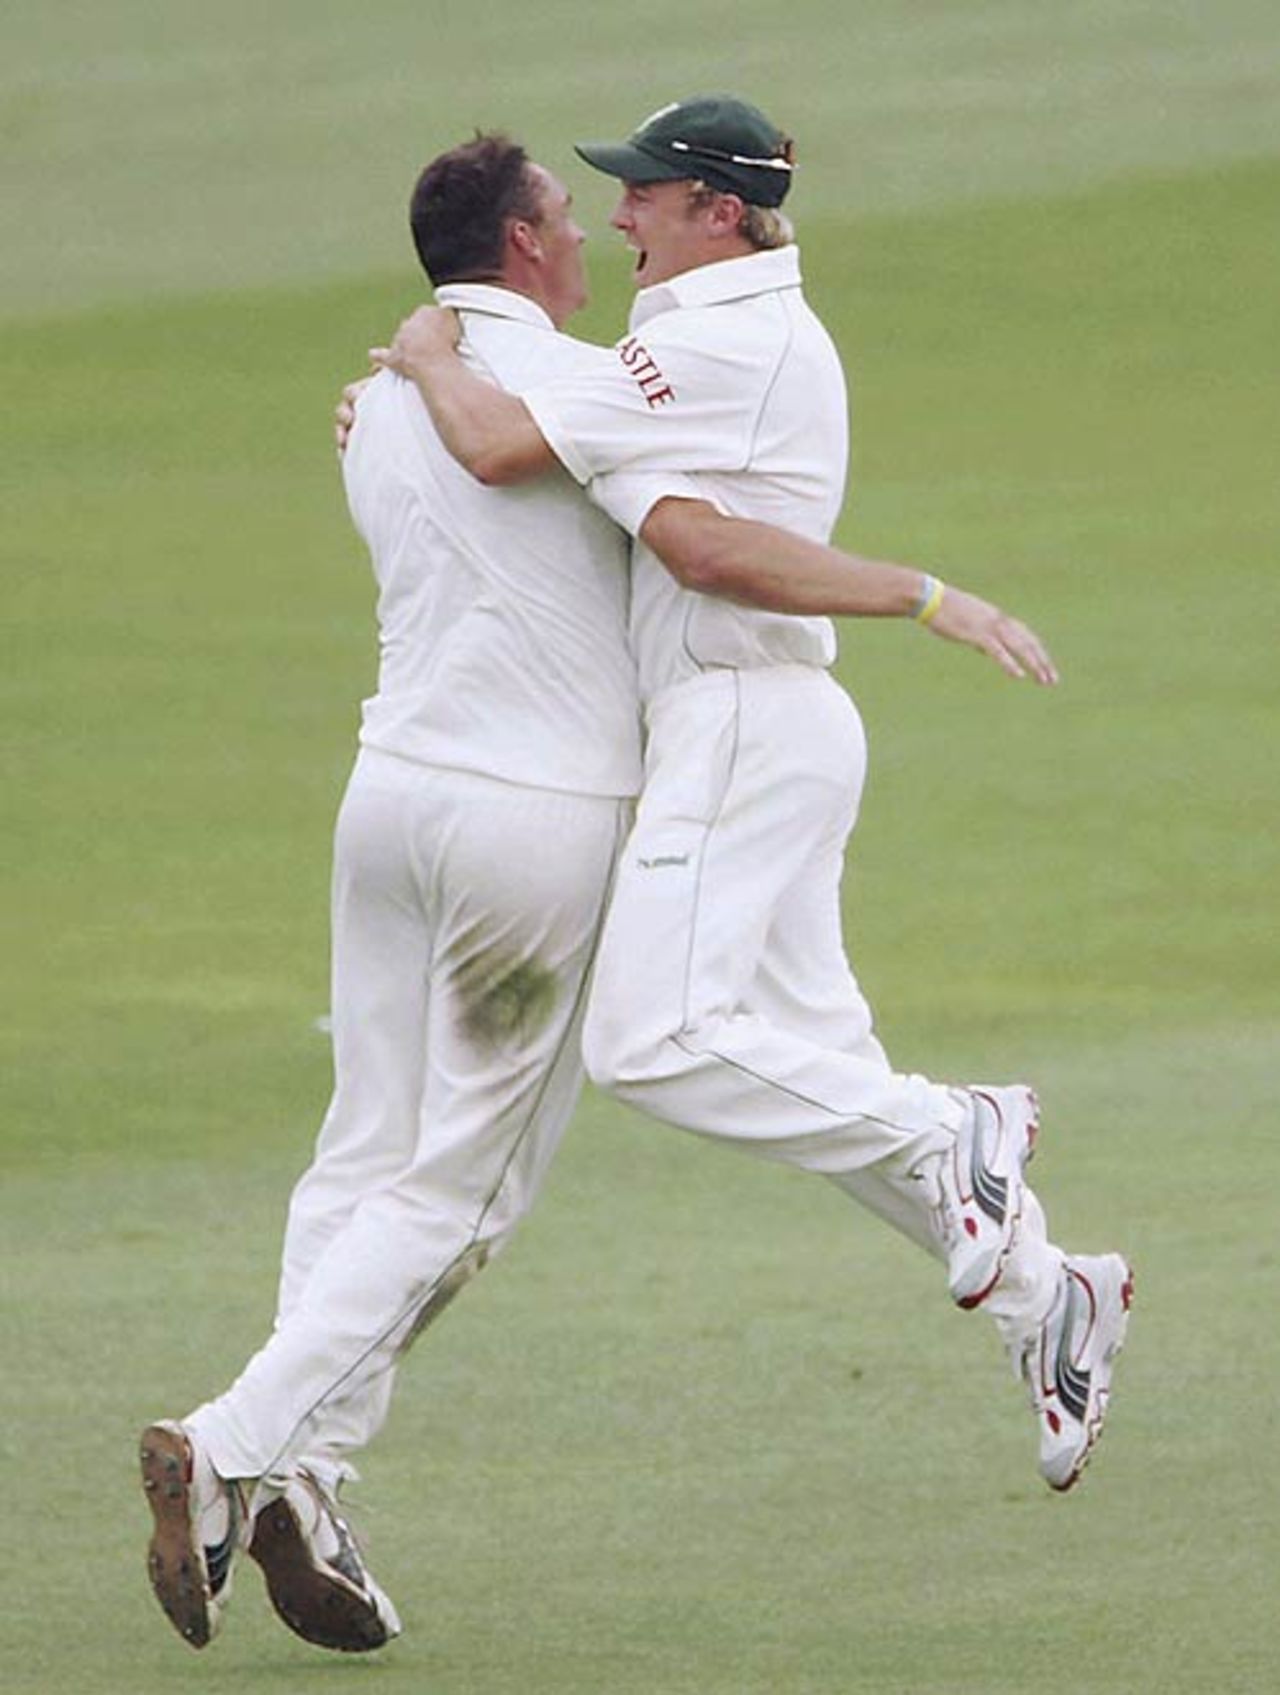 Andre Nel and AB de Villiers rejoice after Zaheer Khan's wicket, South Africa v India, 2nd Test, Durban, 5th day, December 30, 2006